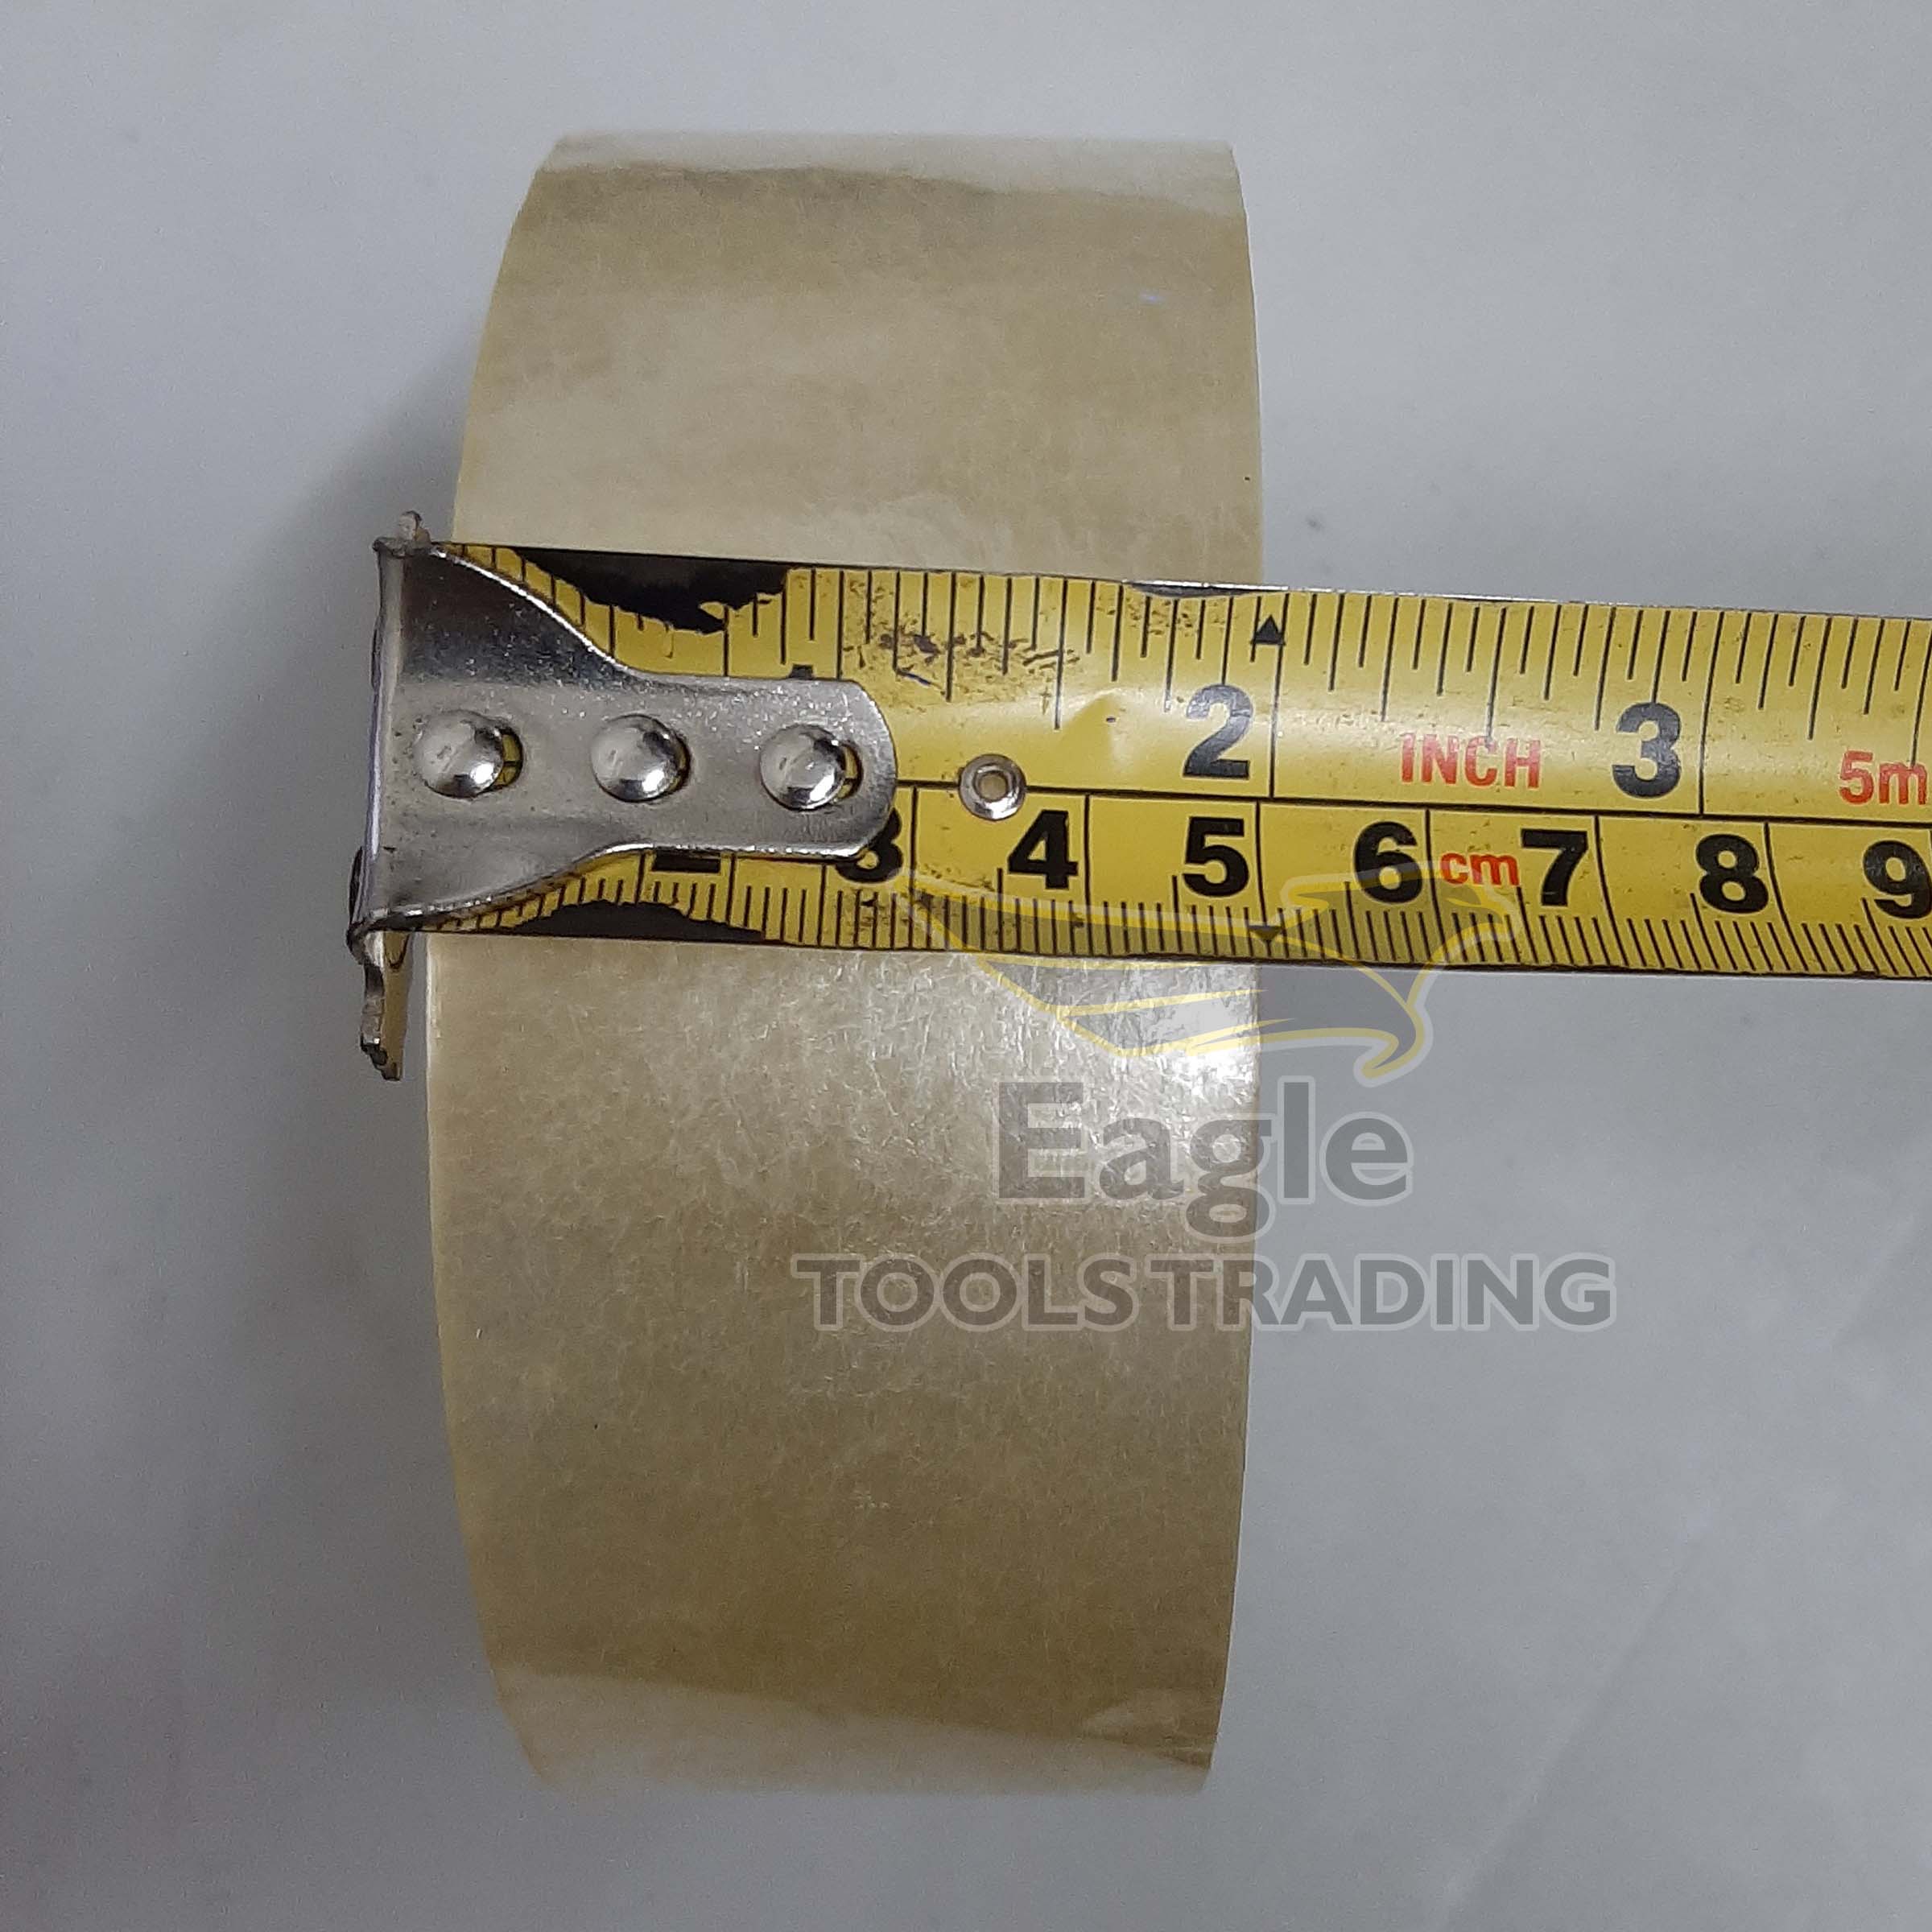 Tape 2 inch (5cm) x 200 meters length transparent adhesive tape Packaging  Clear Tape